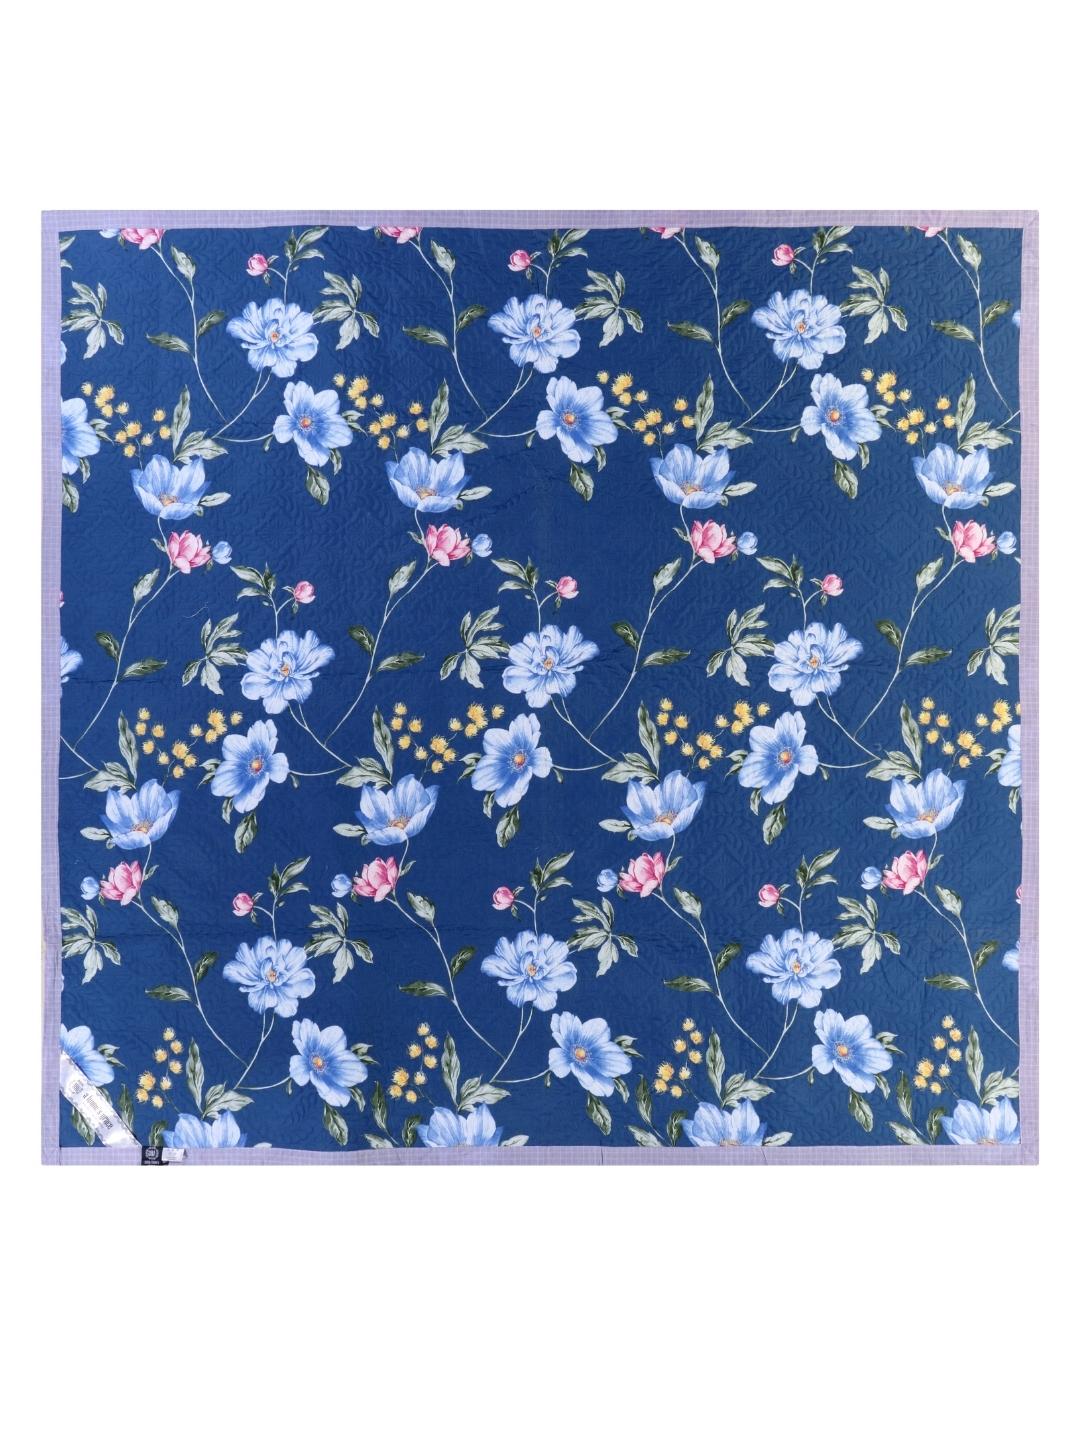 Floral Print Double Bed Light Weight Comforter-Blue